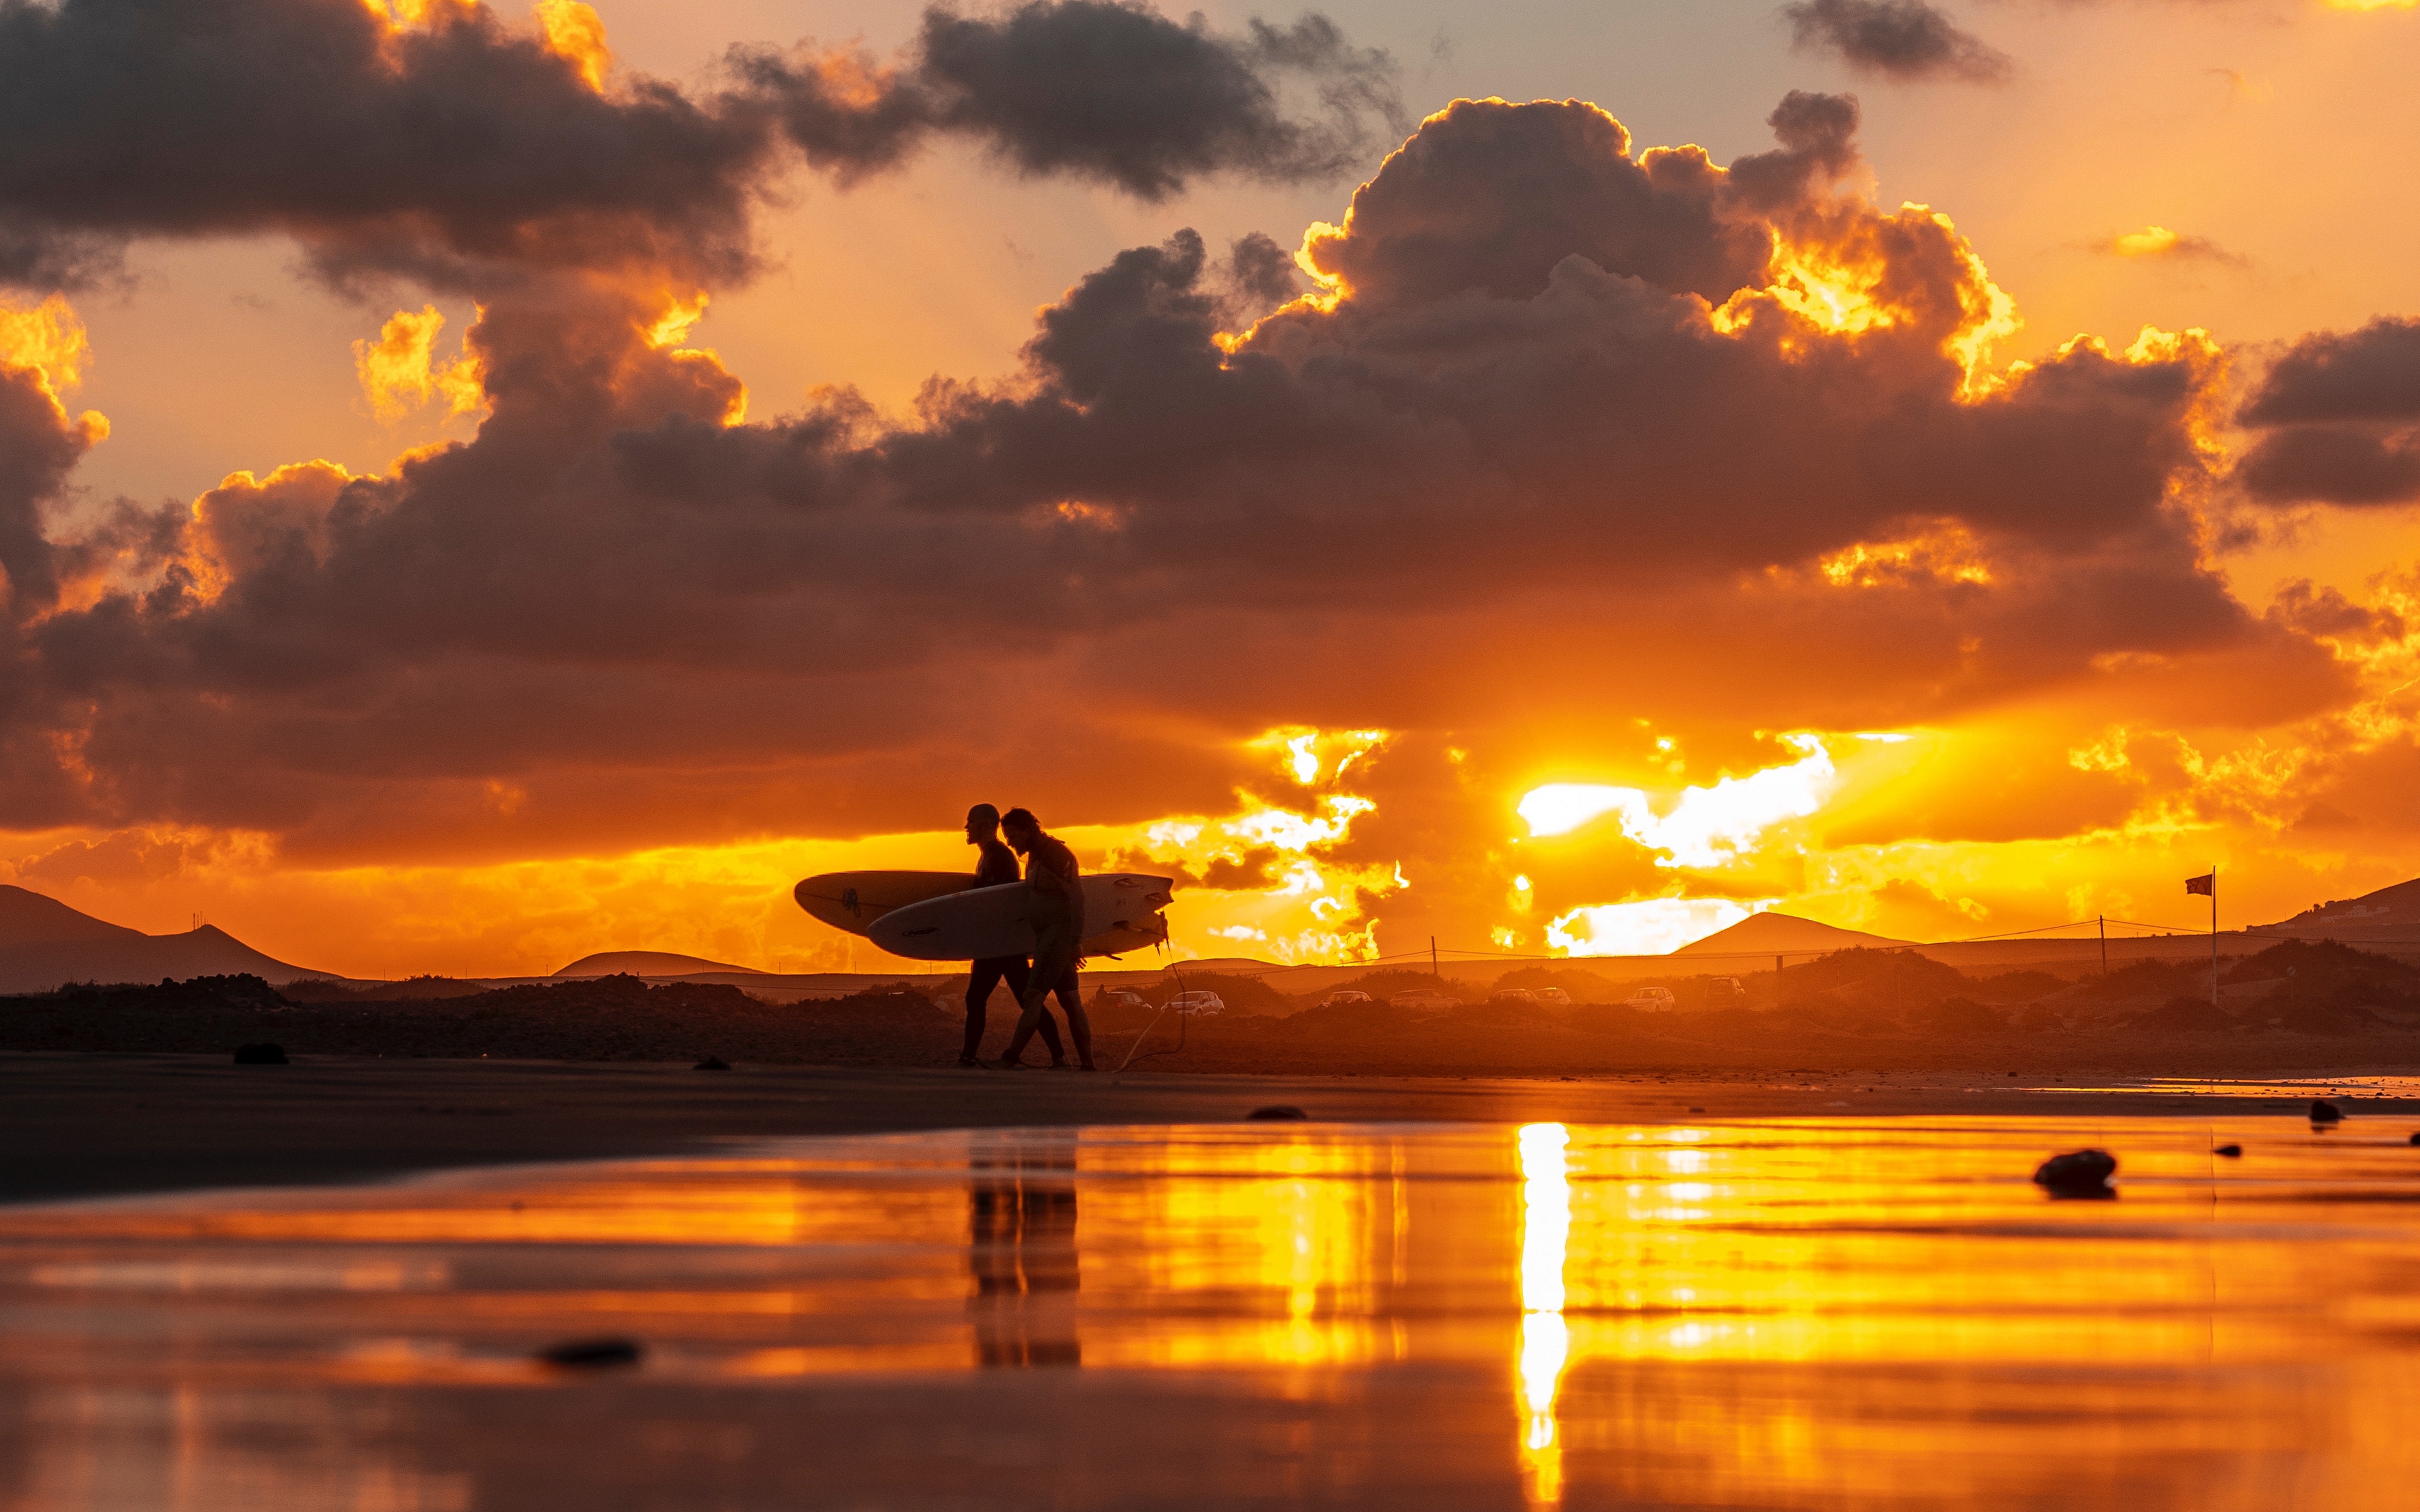 Wallpaper Ocean, Silhouettes, Surfing, Surfers, Sunset - Two Most Powerful Warriors Are Patience - HD Wallpaper 